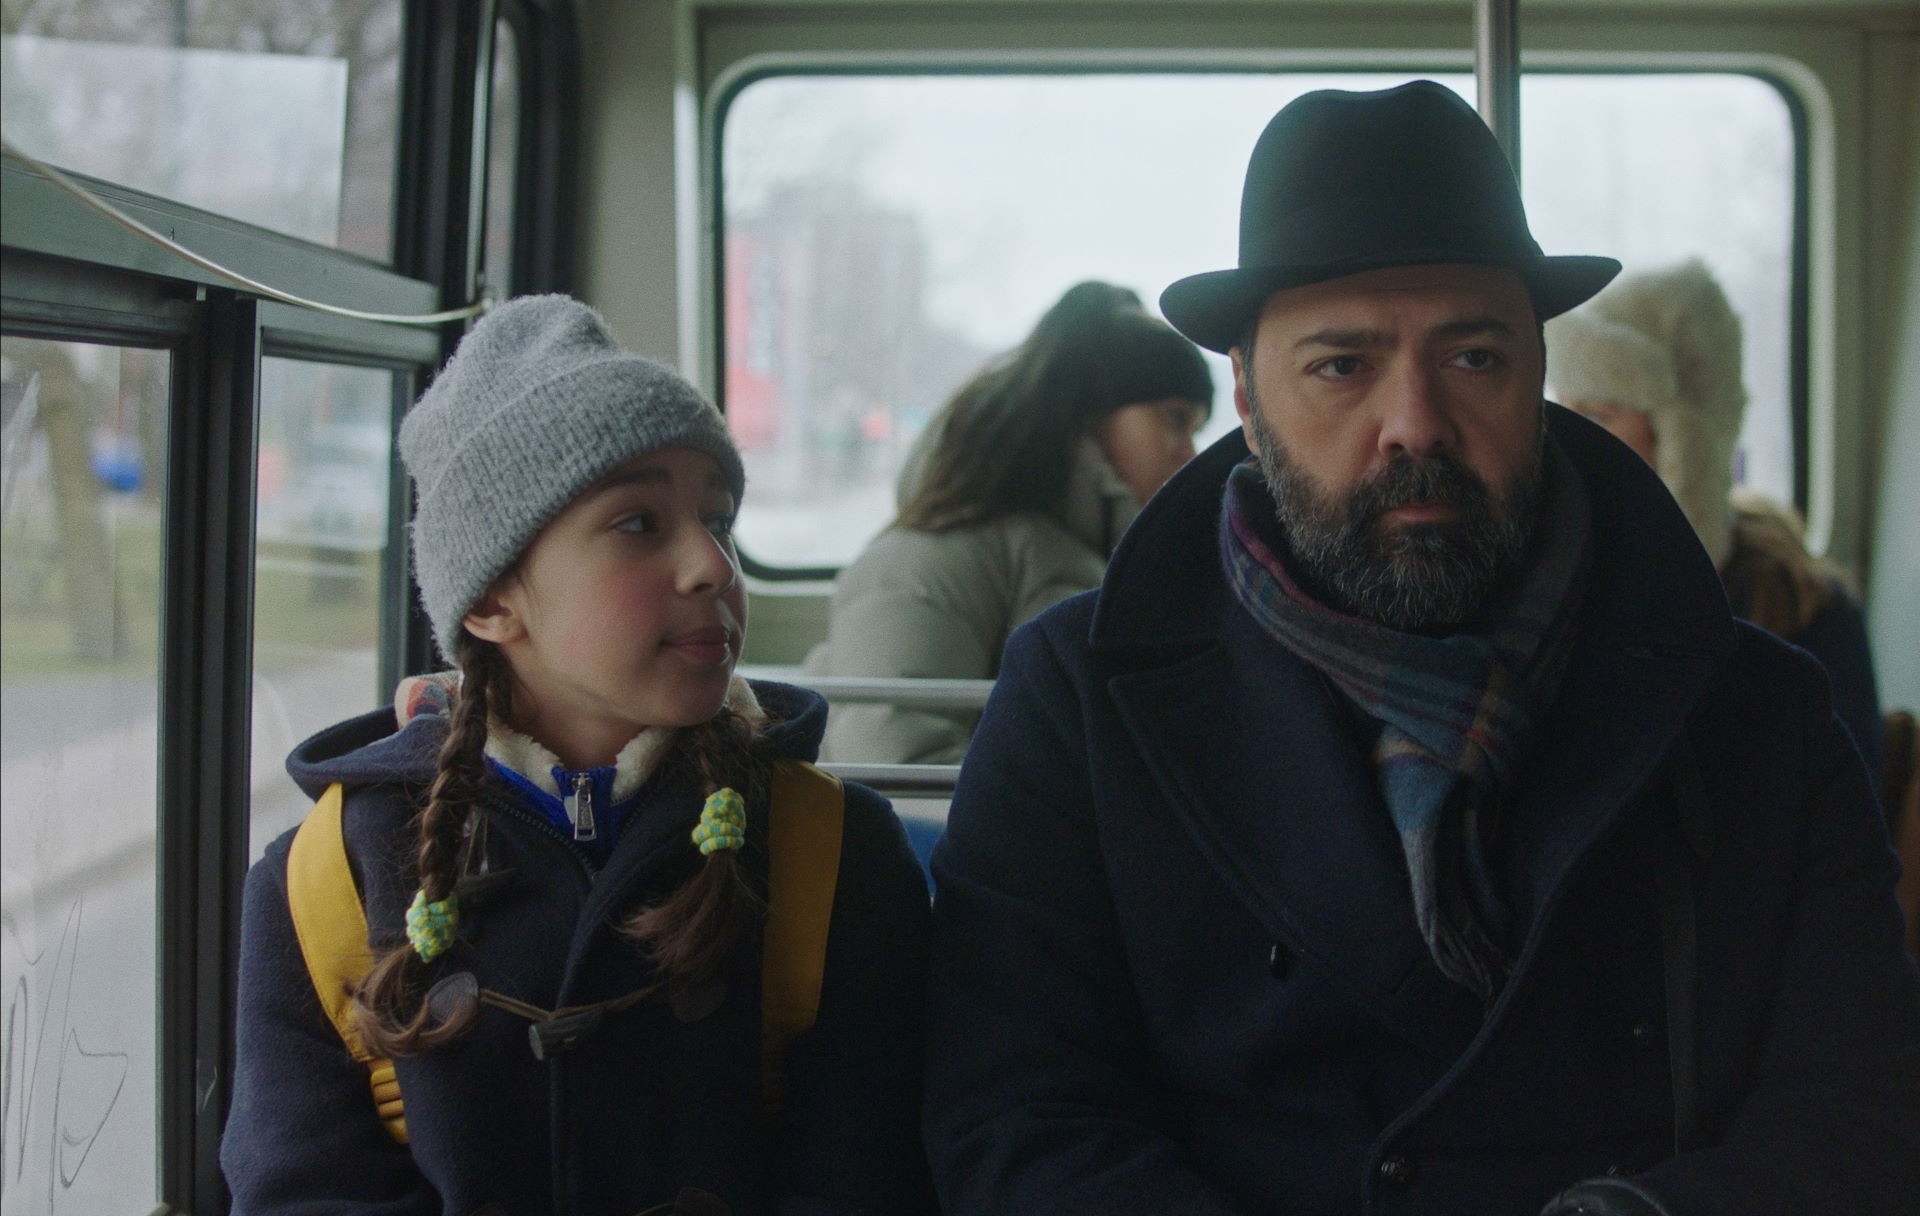 A girl and man dressed in winter clothes sit on a bus. The girl wears a grey toque and looks up at the man who wears a black hat.